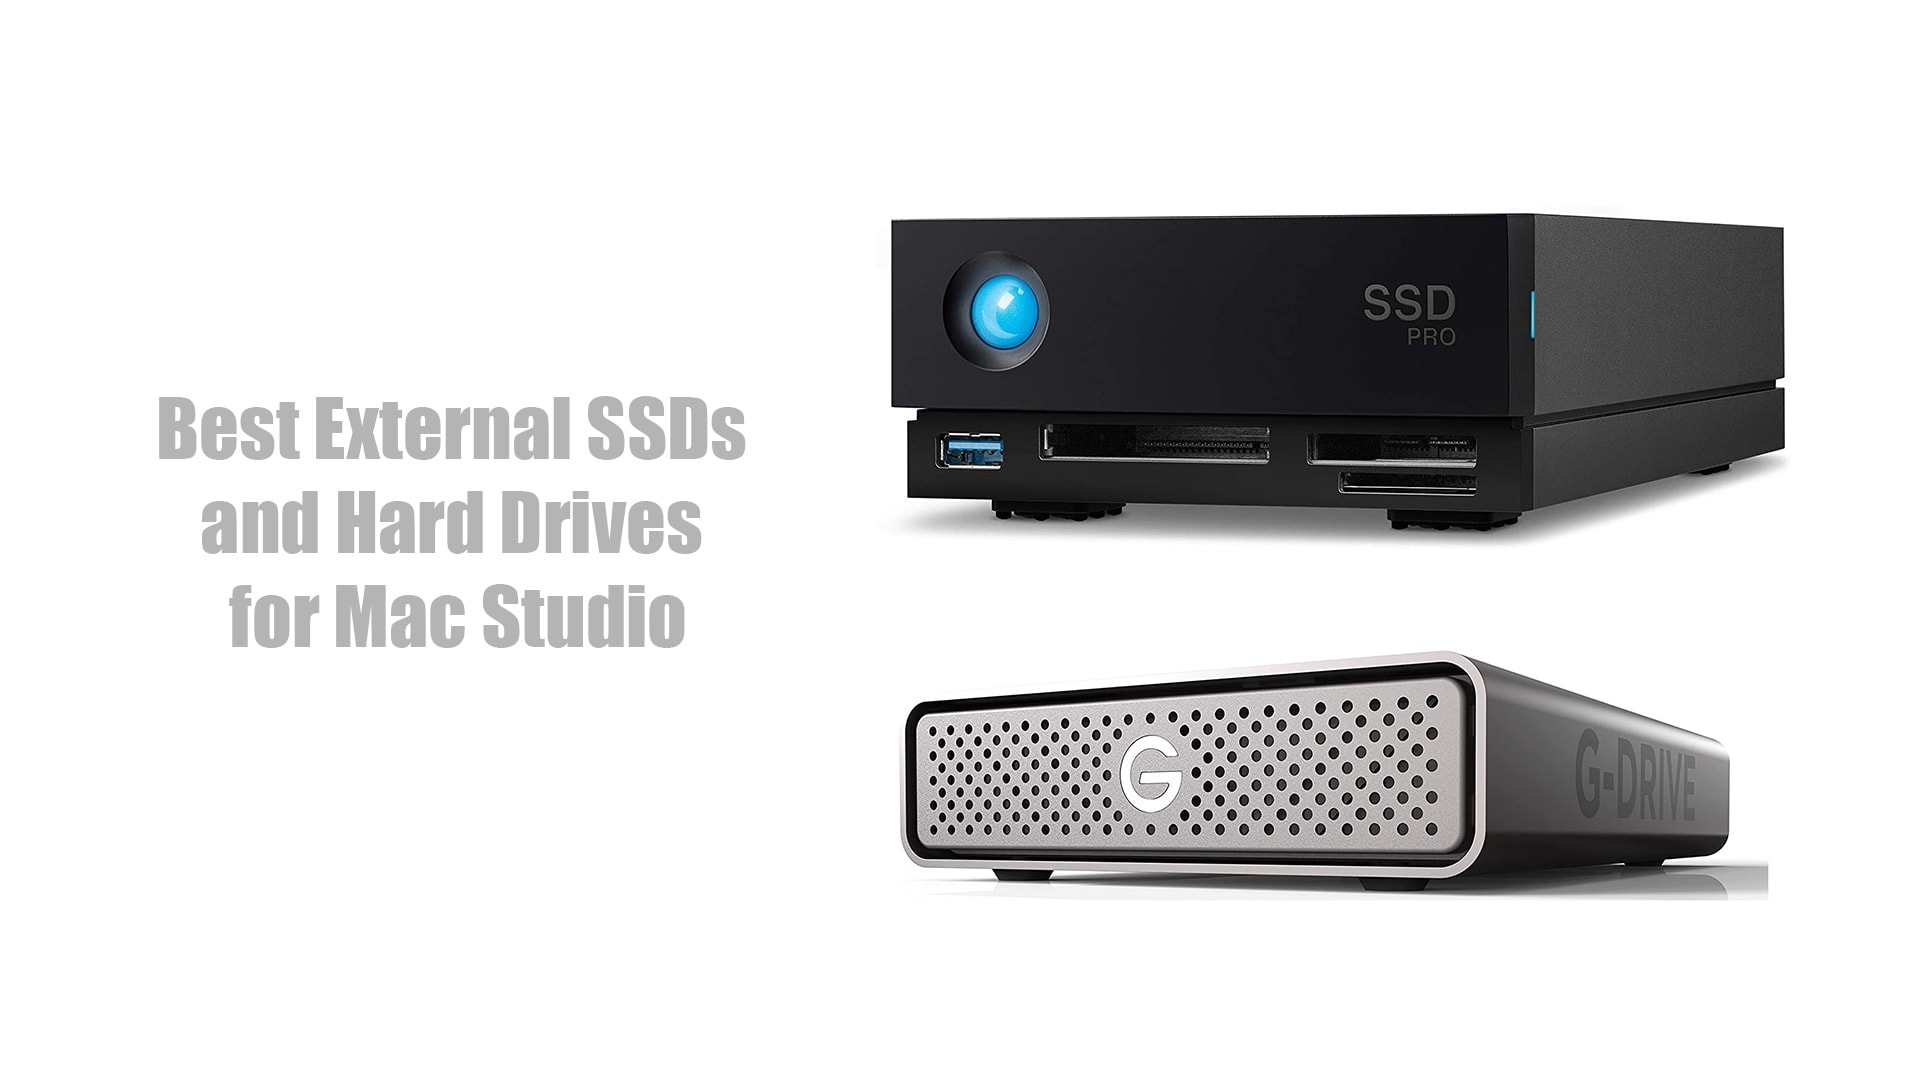 Best External SSDs and Hard Drives for Mac Studio